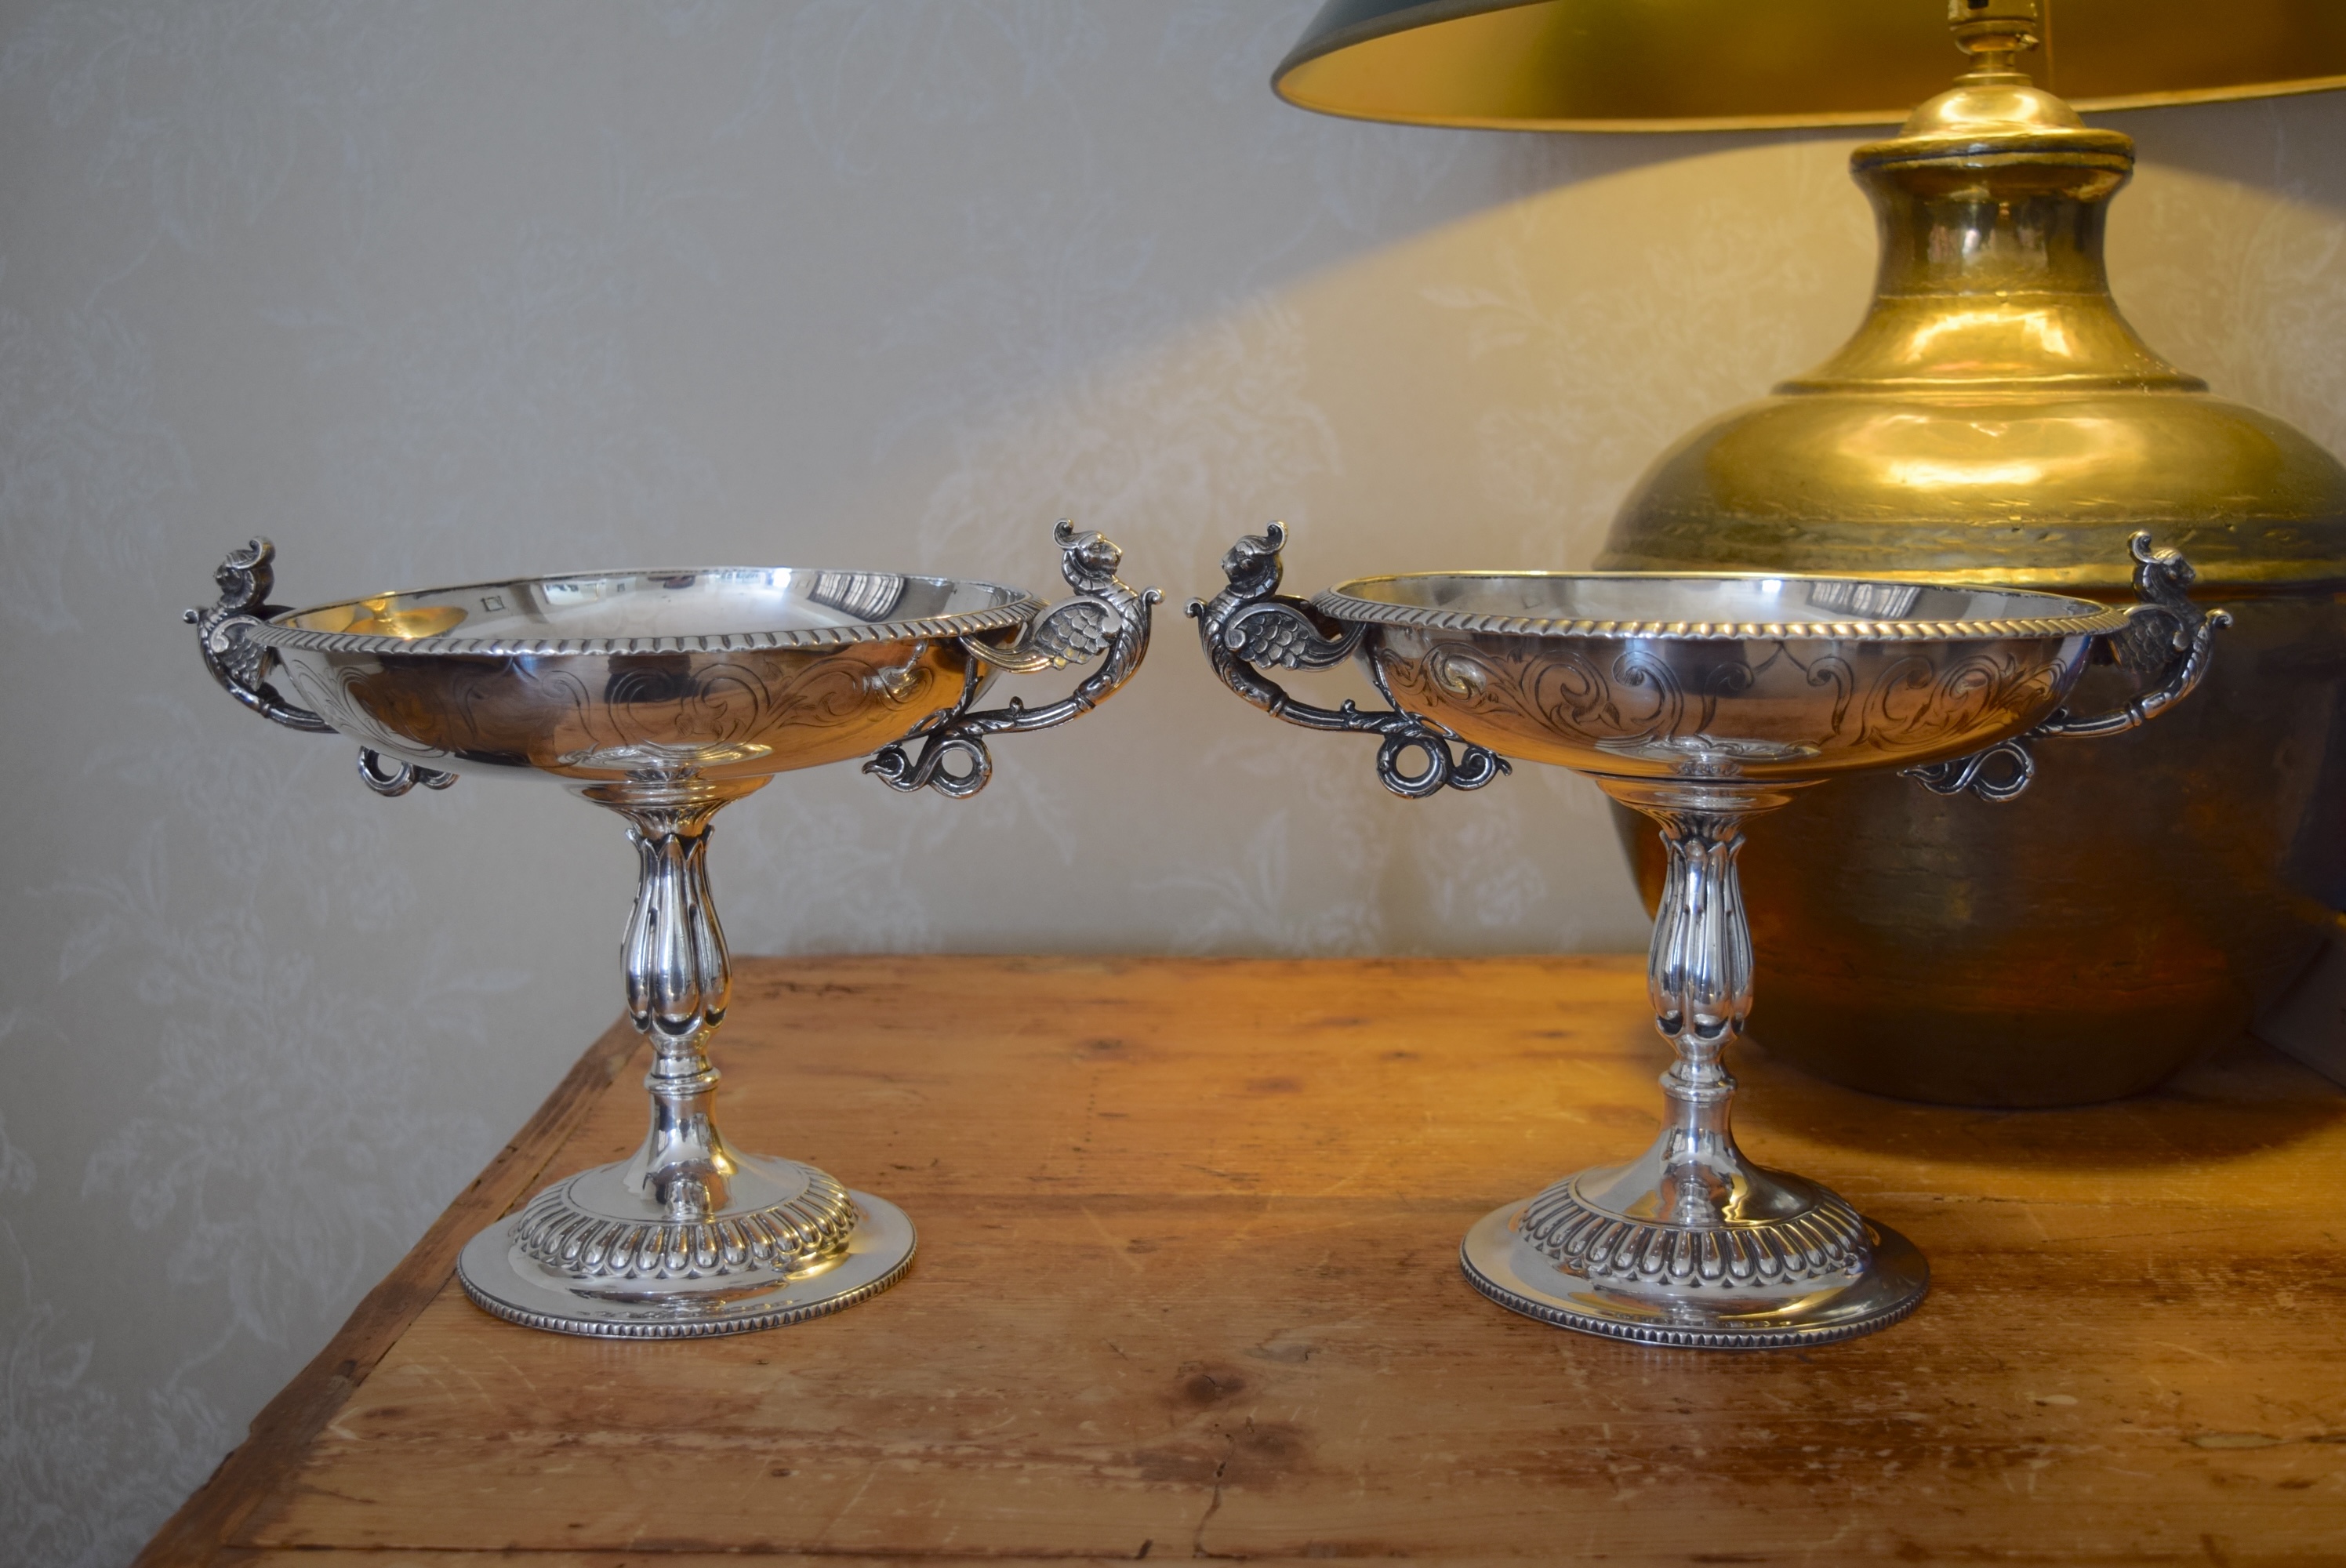 BEAUTIFUL VICTORIAN SILVER TAZZAS LARGE SIZE - APPROX. 850G (GRAMS) EACH - 95% PURE SILVER (AG)